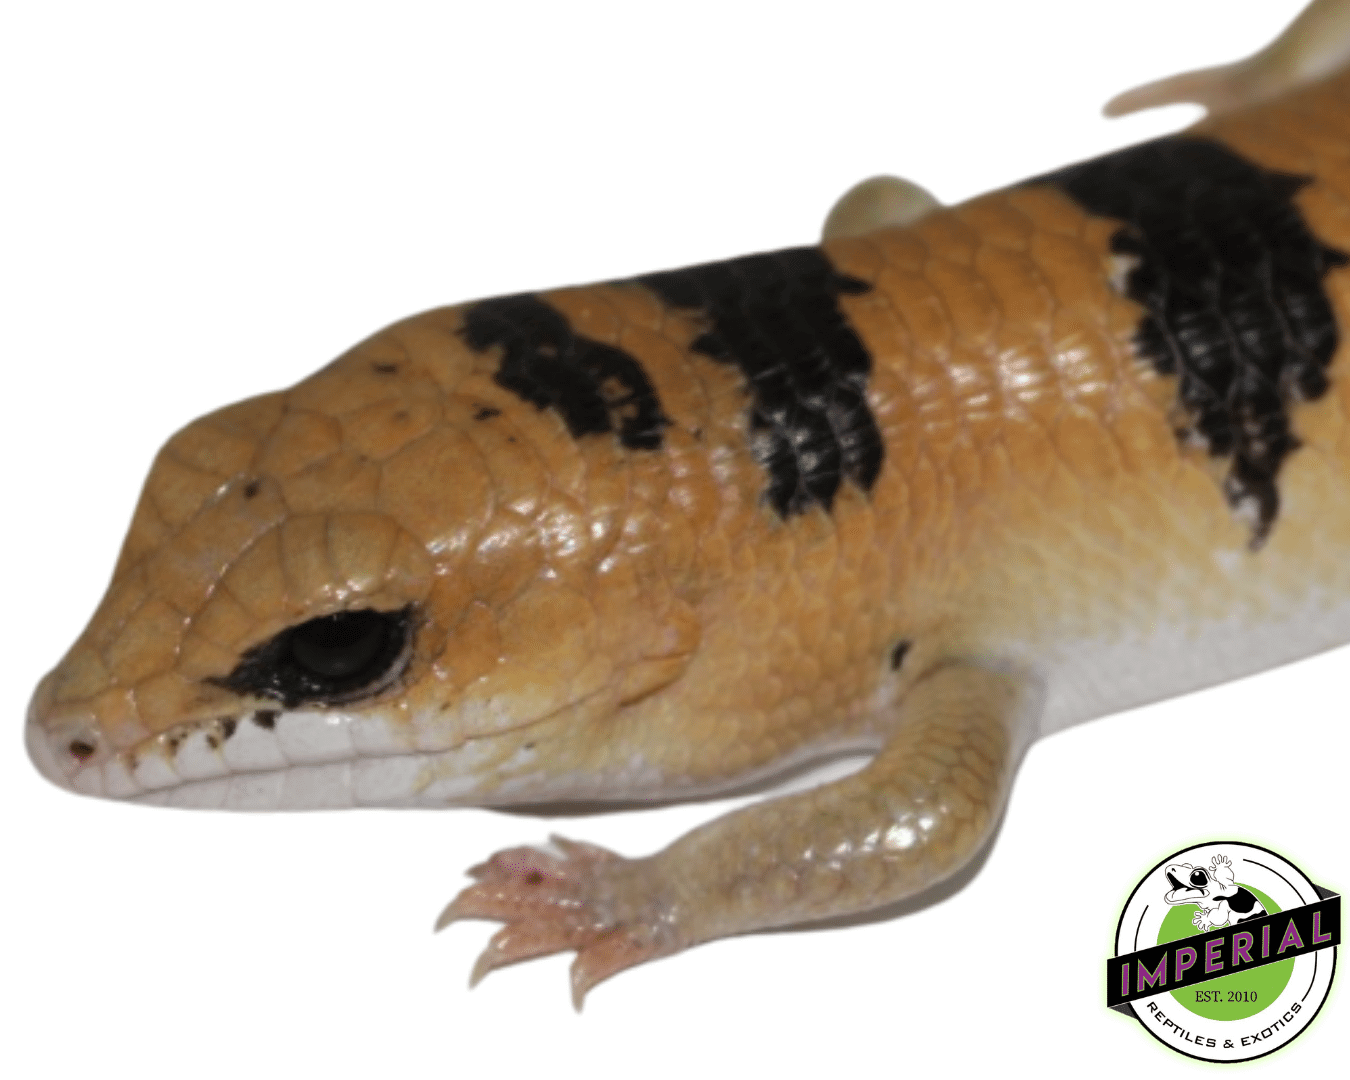 peters banded skink for sale, buy reptiles online